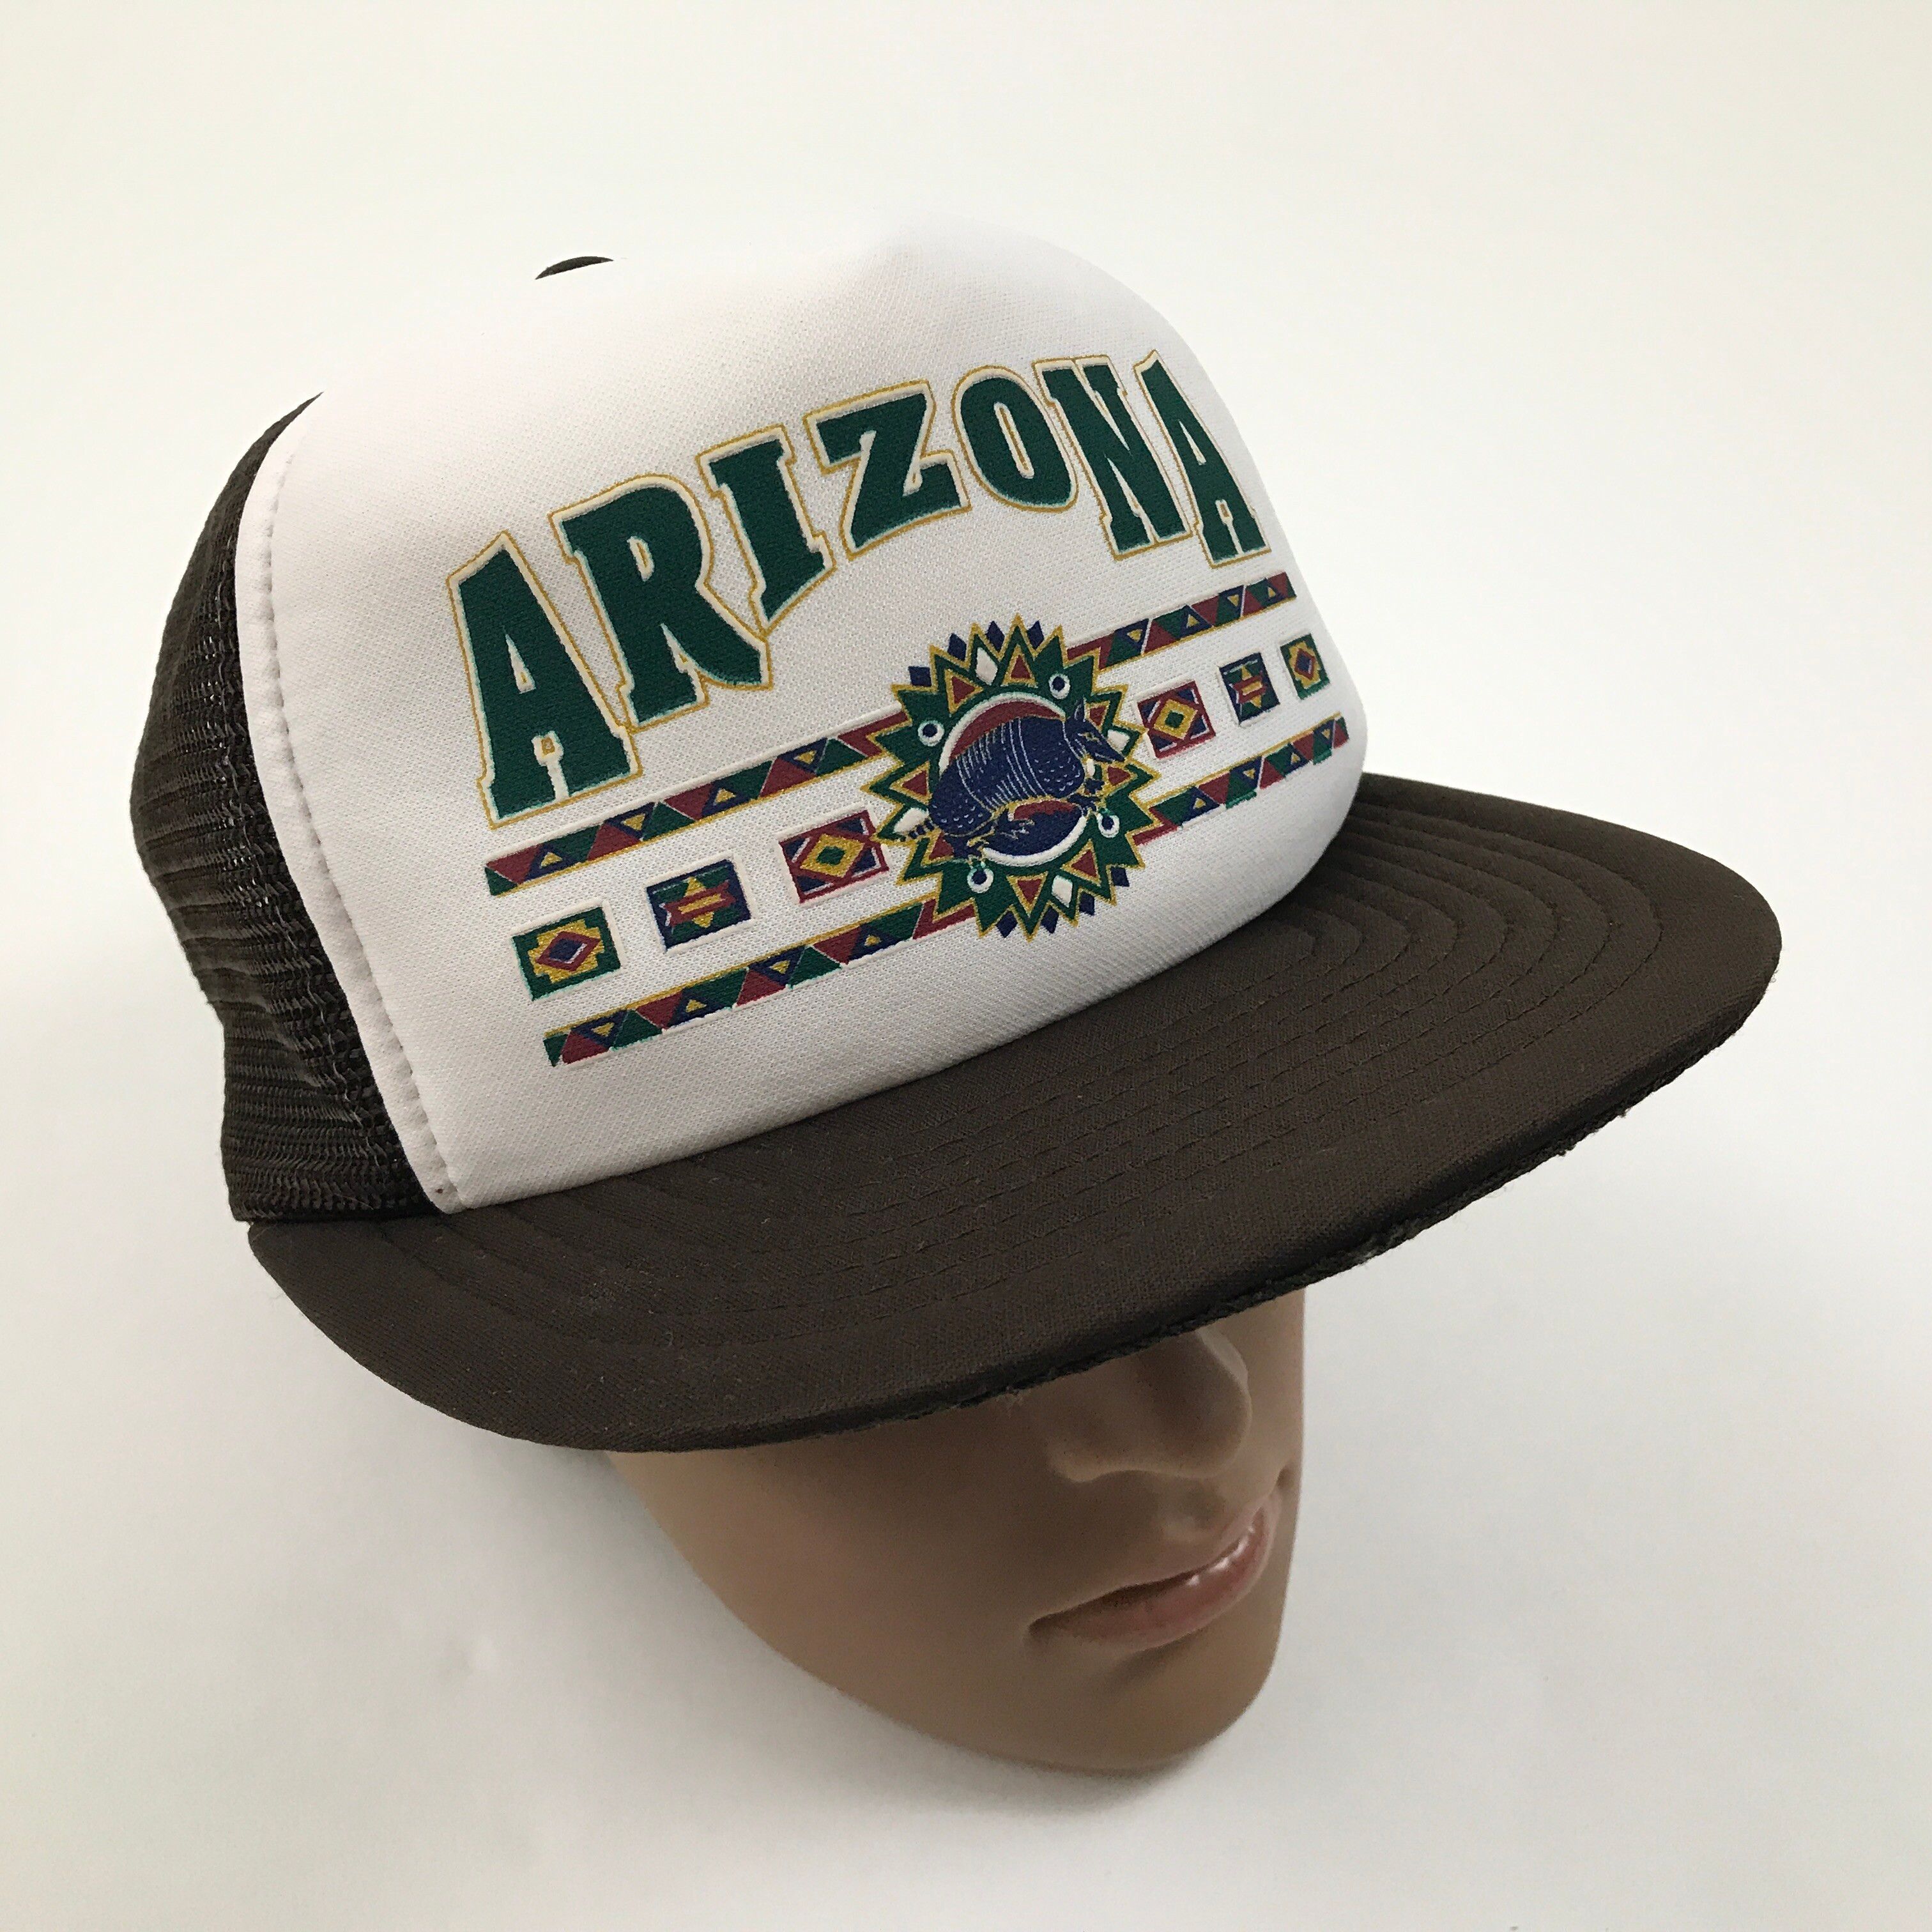 Vintage VINTAGE Arizona Trucker Hat 80's Snapback FOAM Front South Size ONE SIZE - 1 Preview